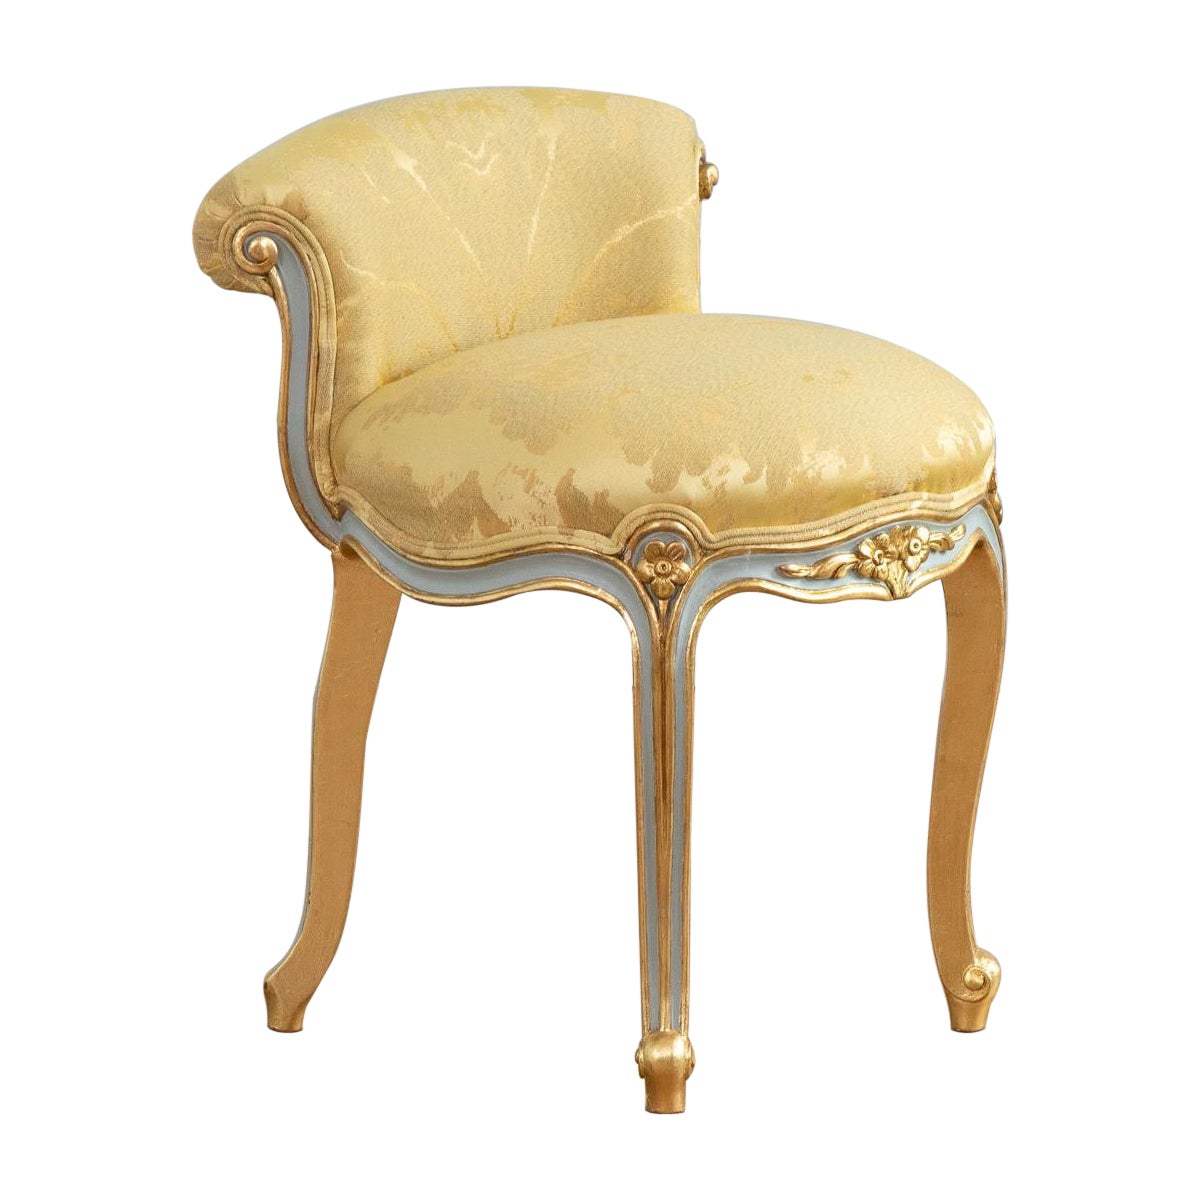 Louis XVI Crosse Renverse Stool Painted with Gold Highlights